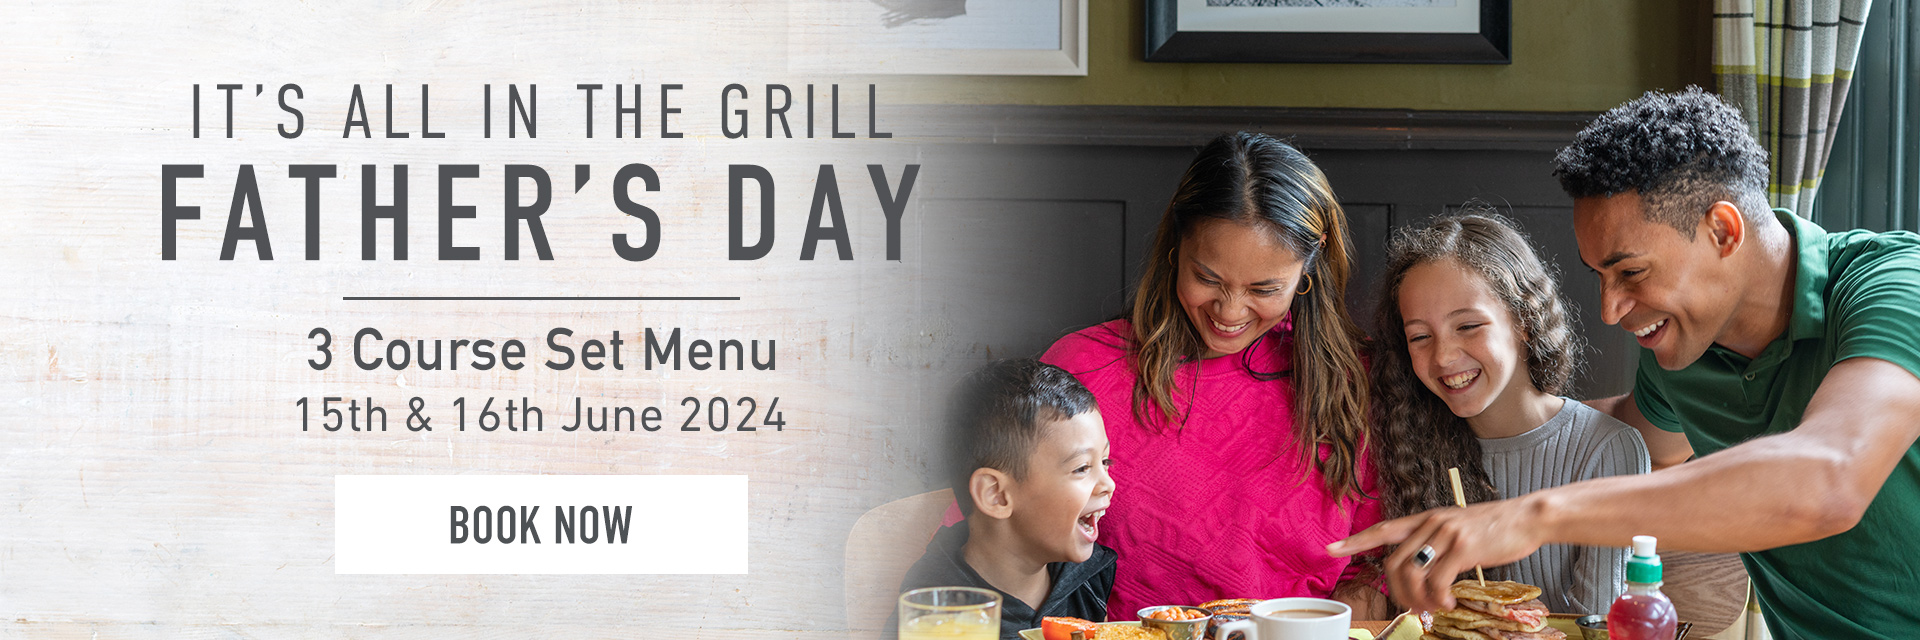 Father’s Day at Harvester Aylesbury